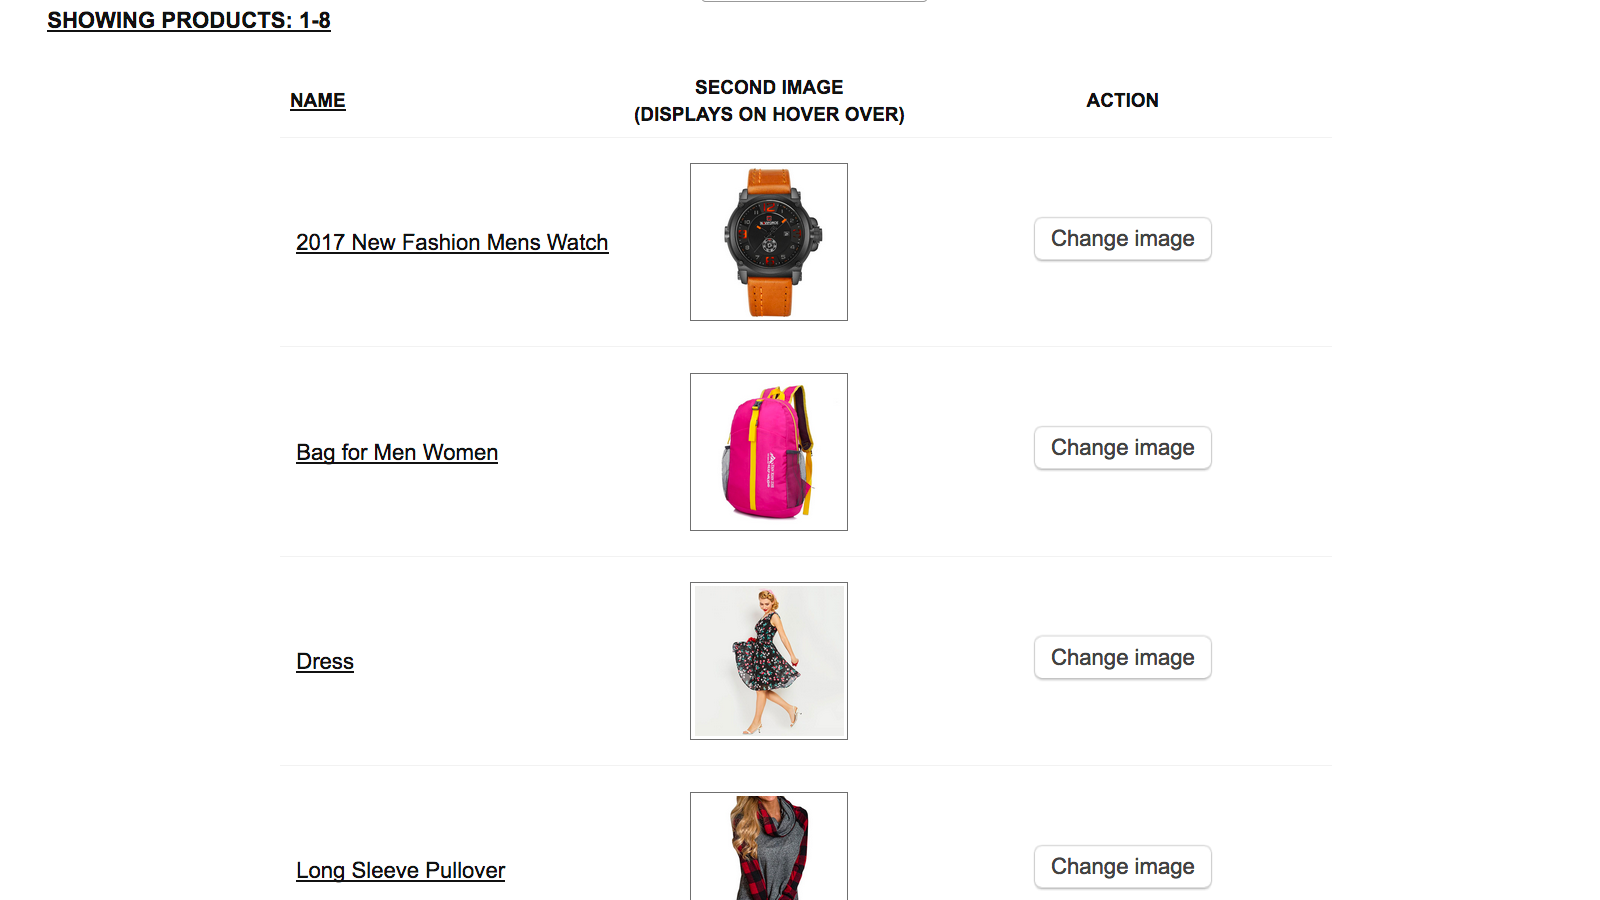 Control panel: List of products with images selected for hover